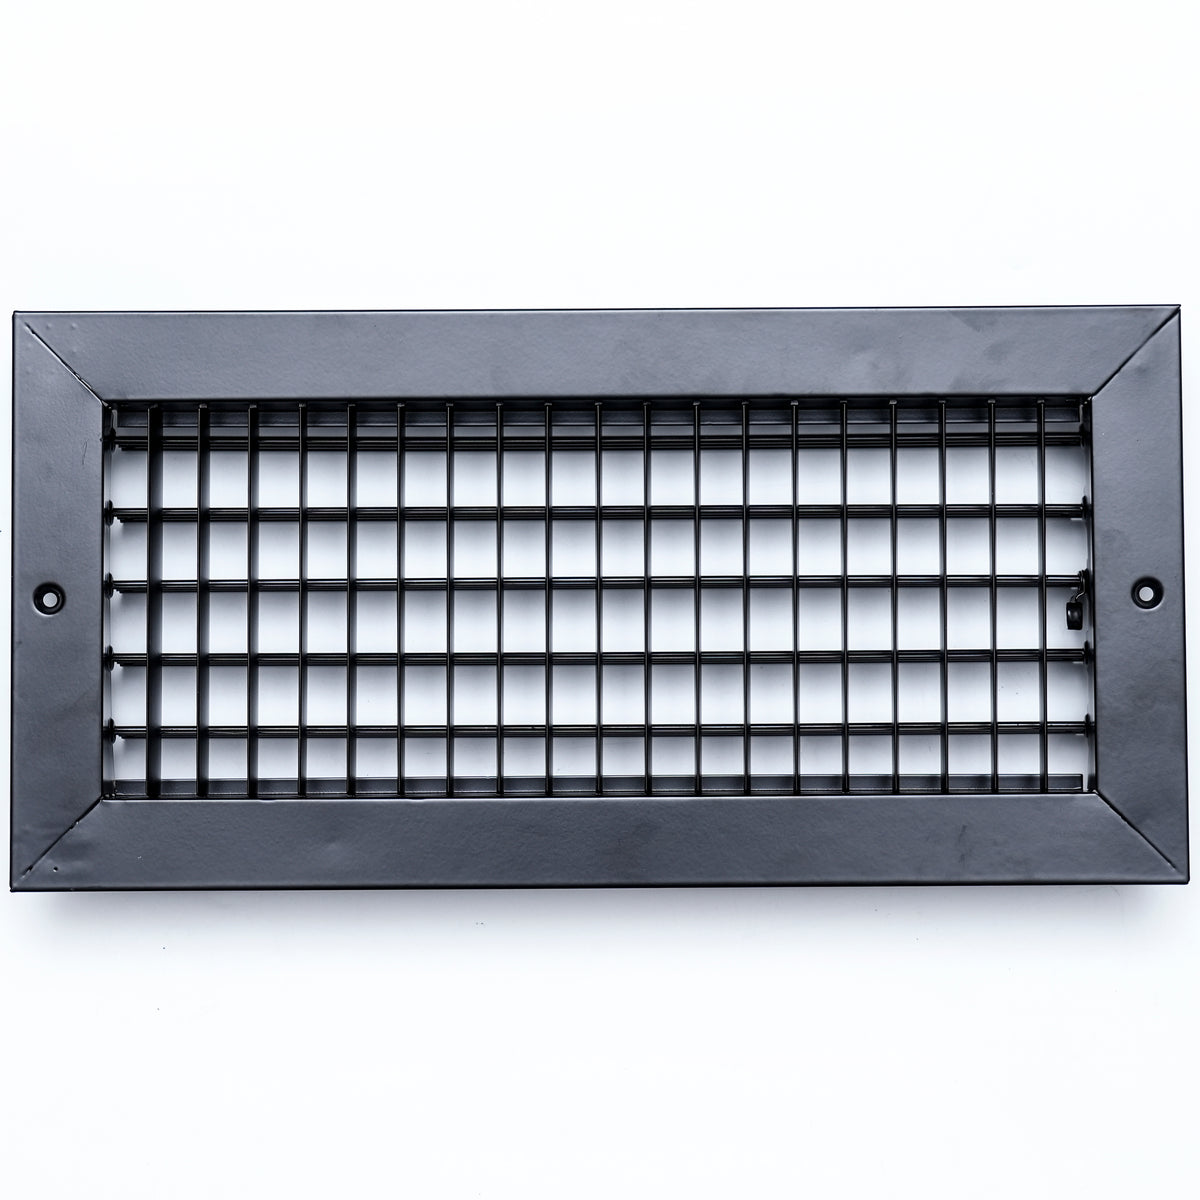 airgrilles 14"w x 6"h steel adjustable air supply grille  -  register vent cover grill for sidewall and ceiling  -  black  -  outer dimensions: 15.75"w x 7.75"h for 14x6 duct opening hnd-adj-bl-14x6  - 1